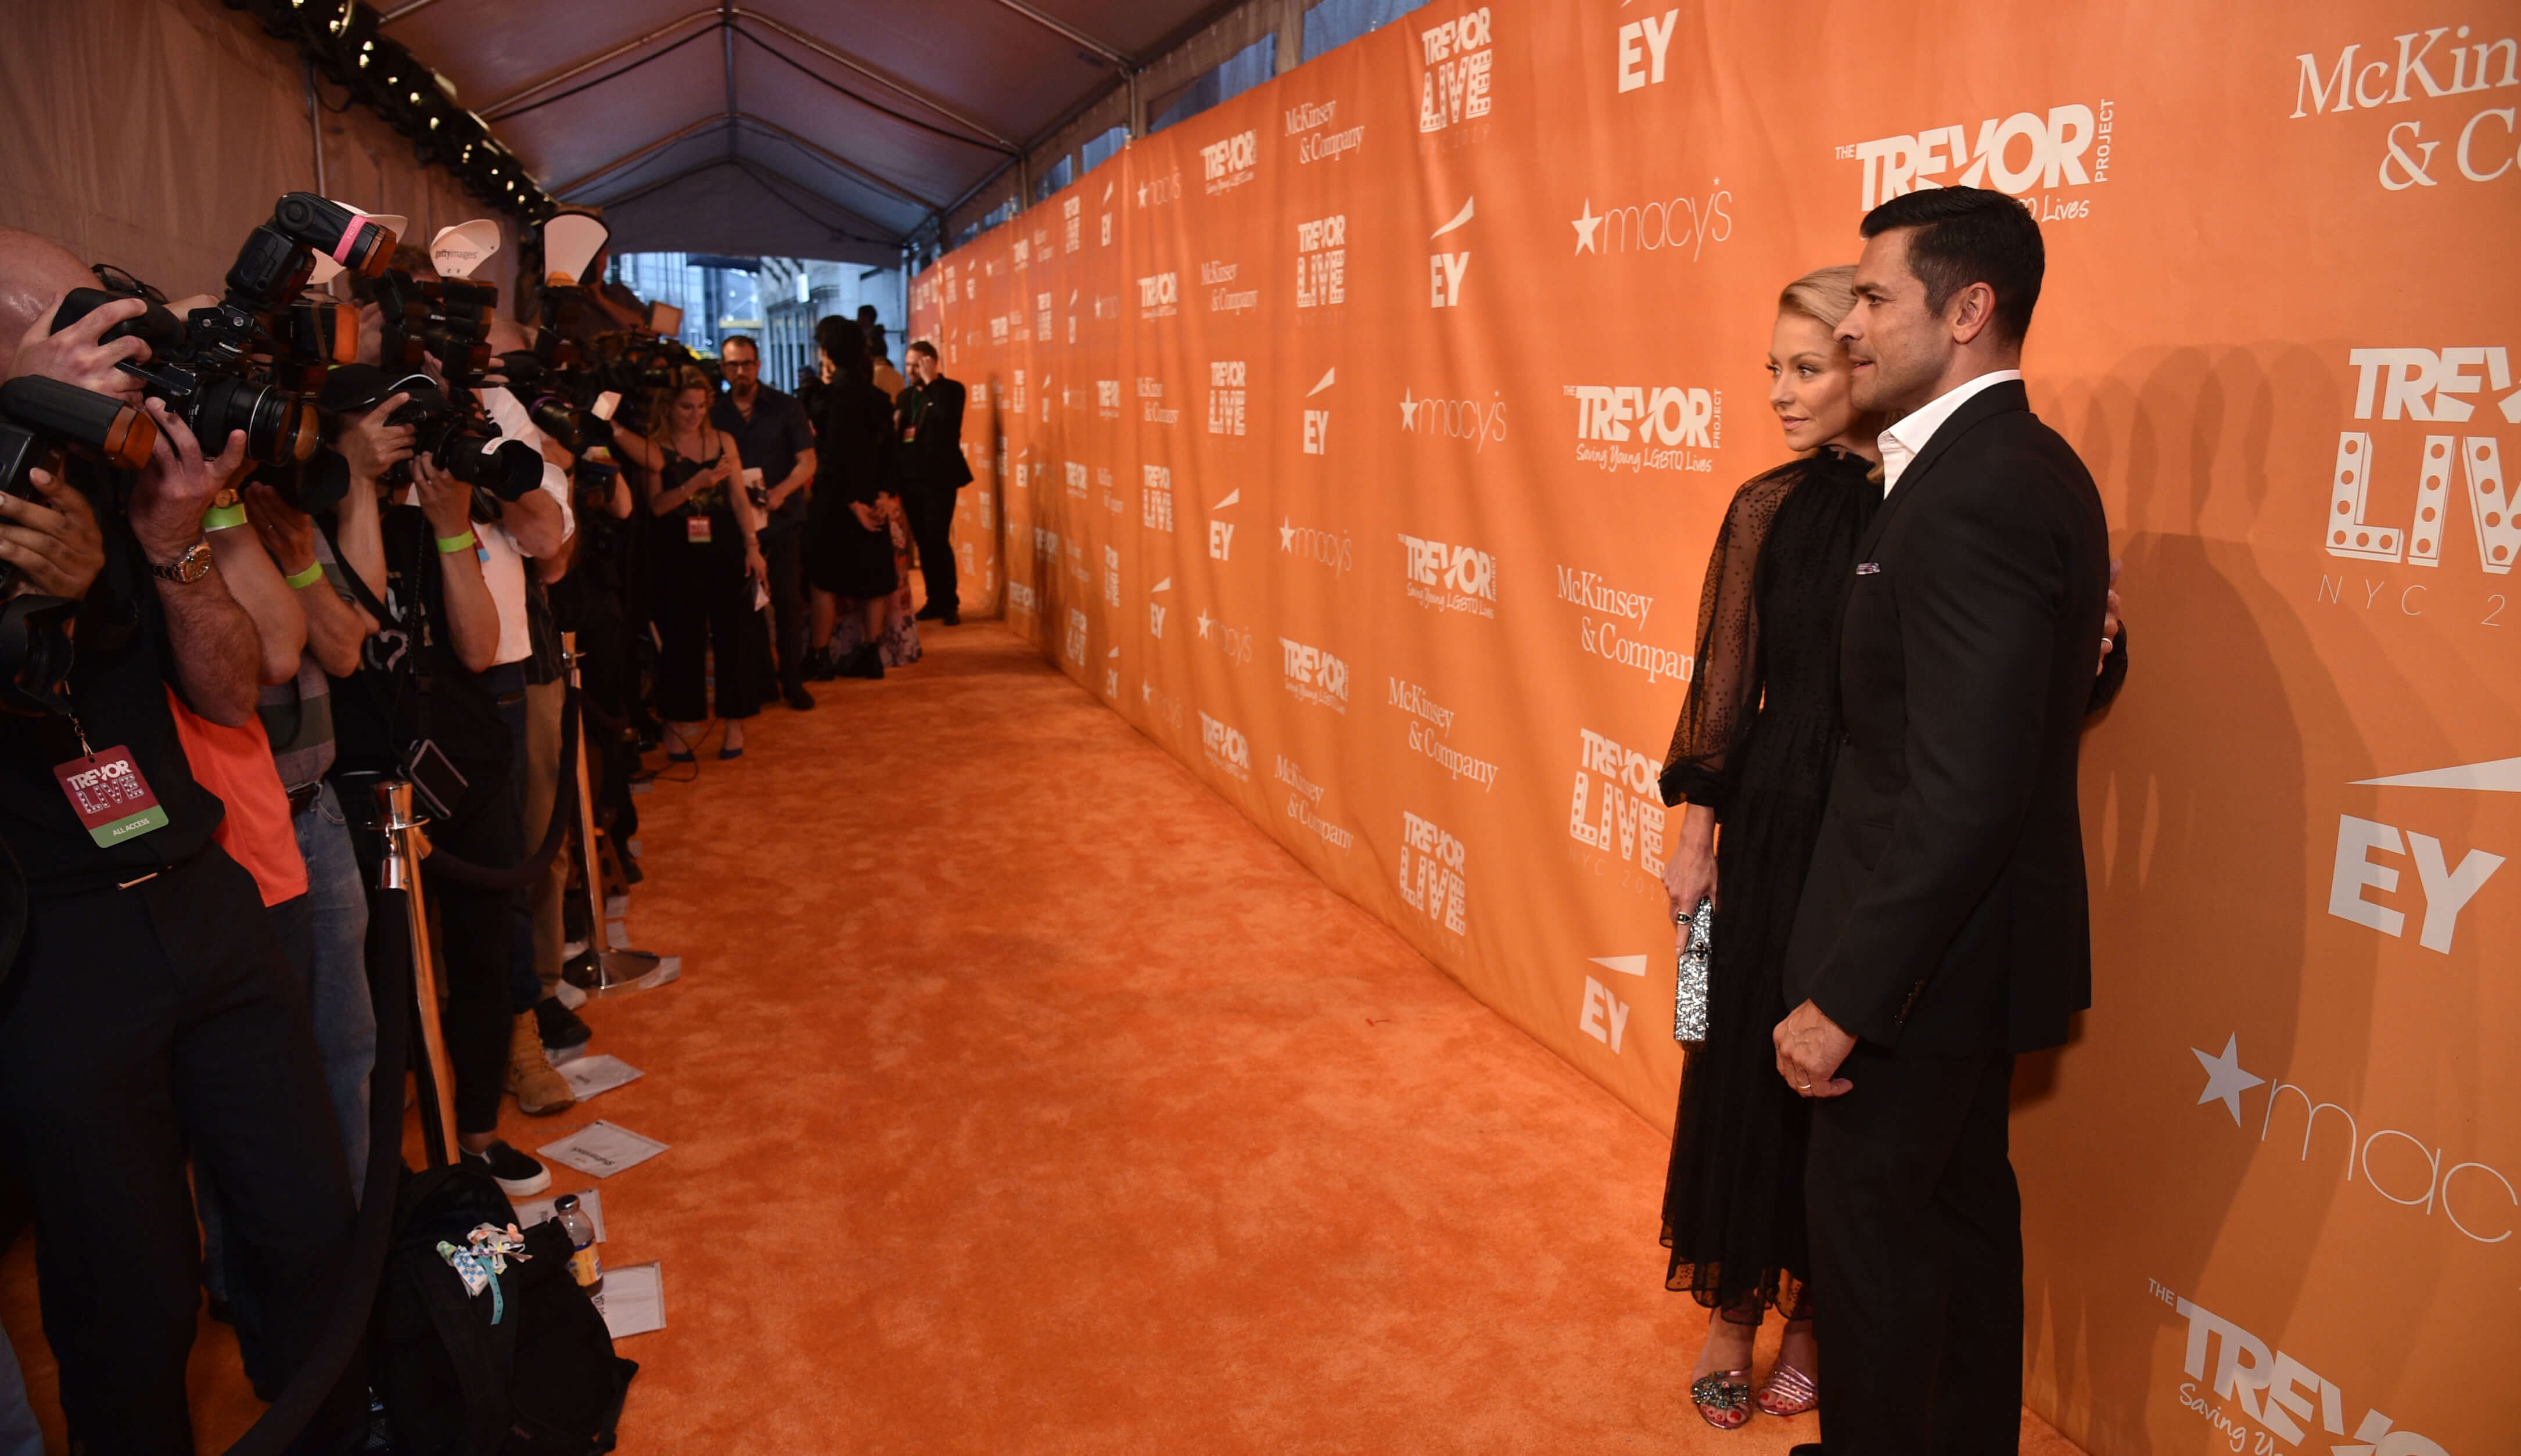 Kelly Ripa and Mark Consuelos in Front of the Orange Carpet Step & Repeat